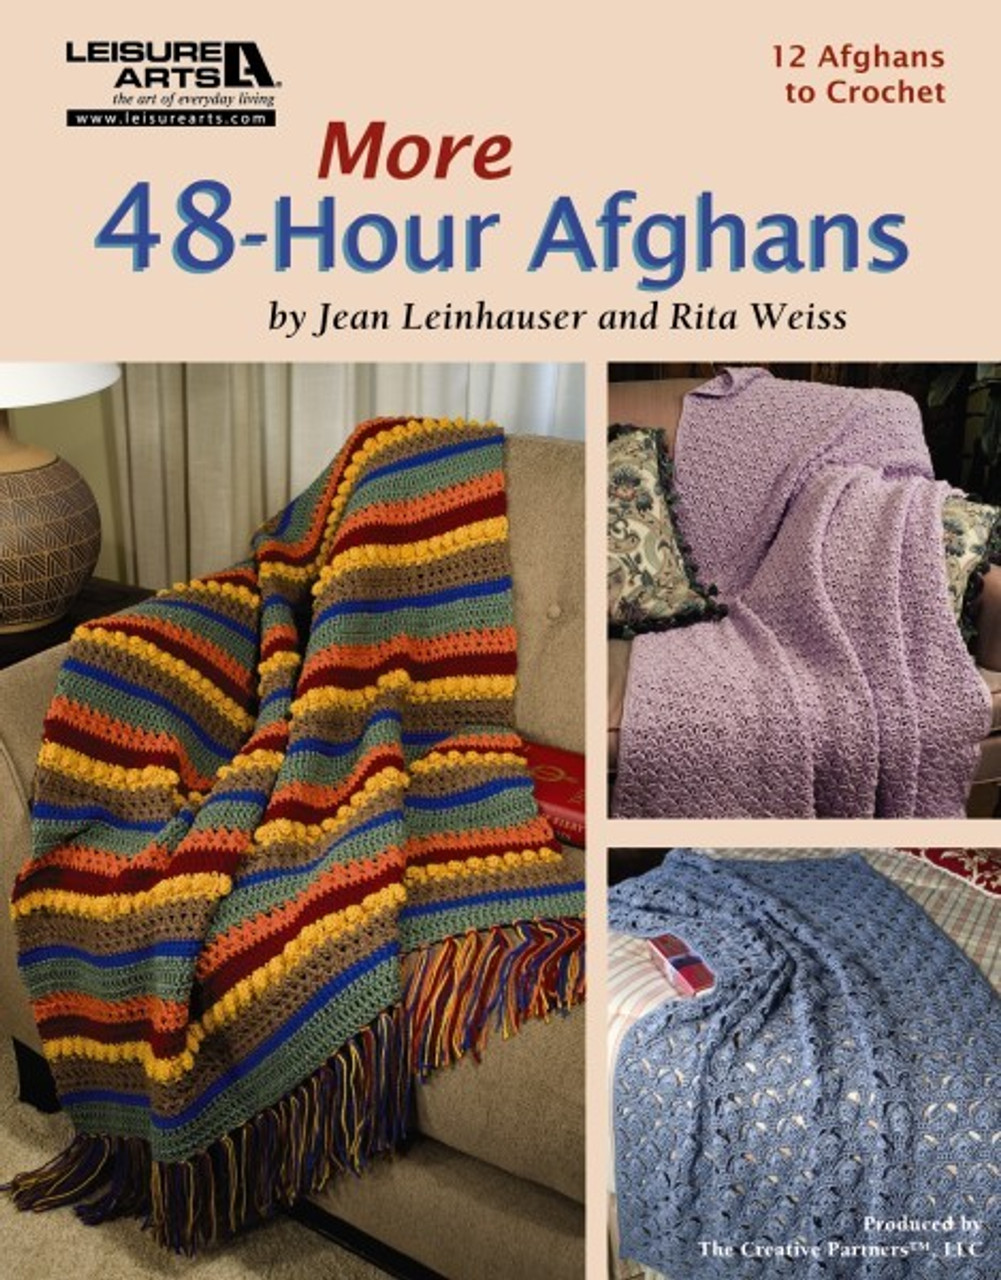 Leisure ARTS-More 48-Hour Afghans